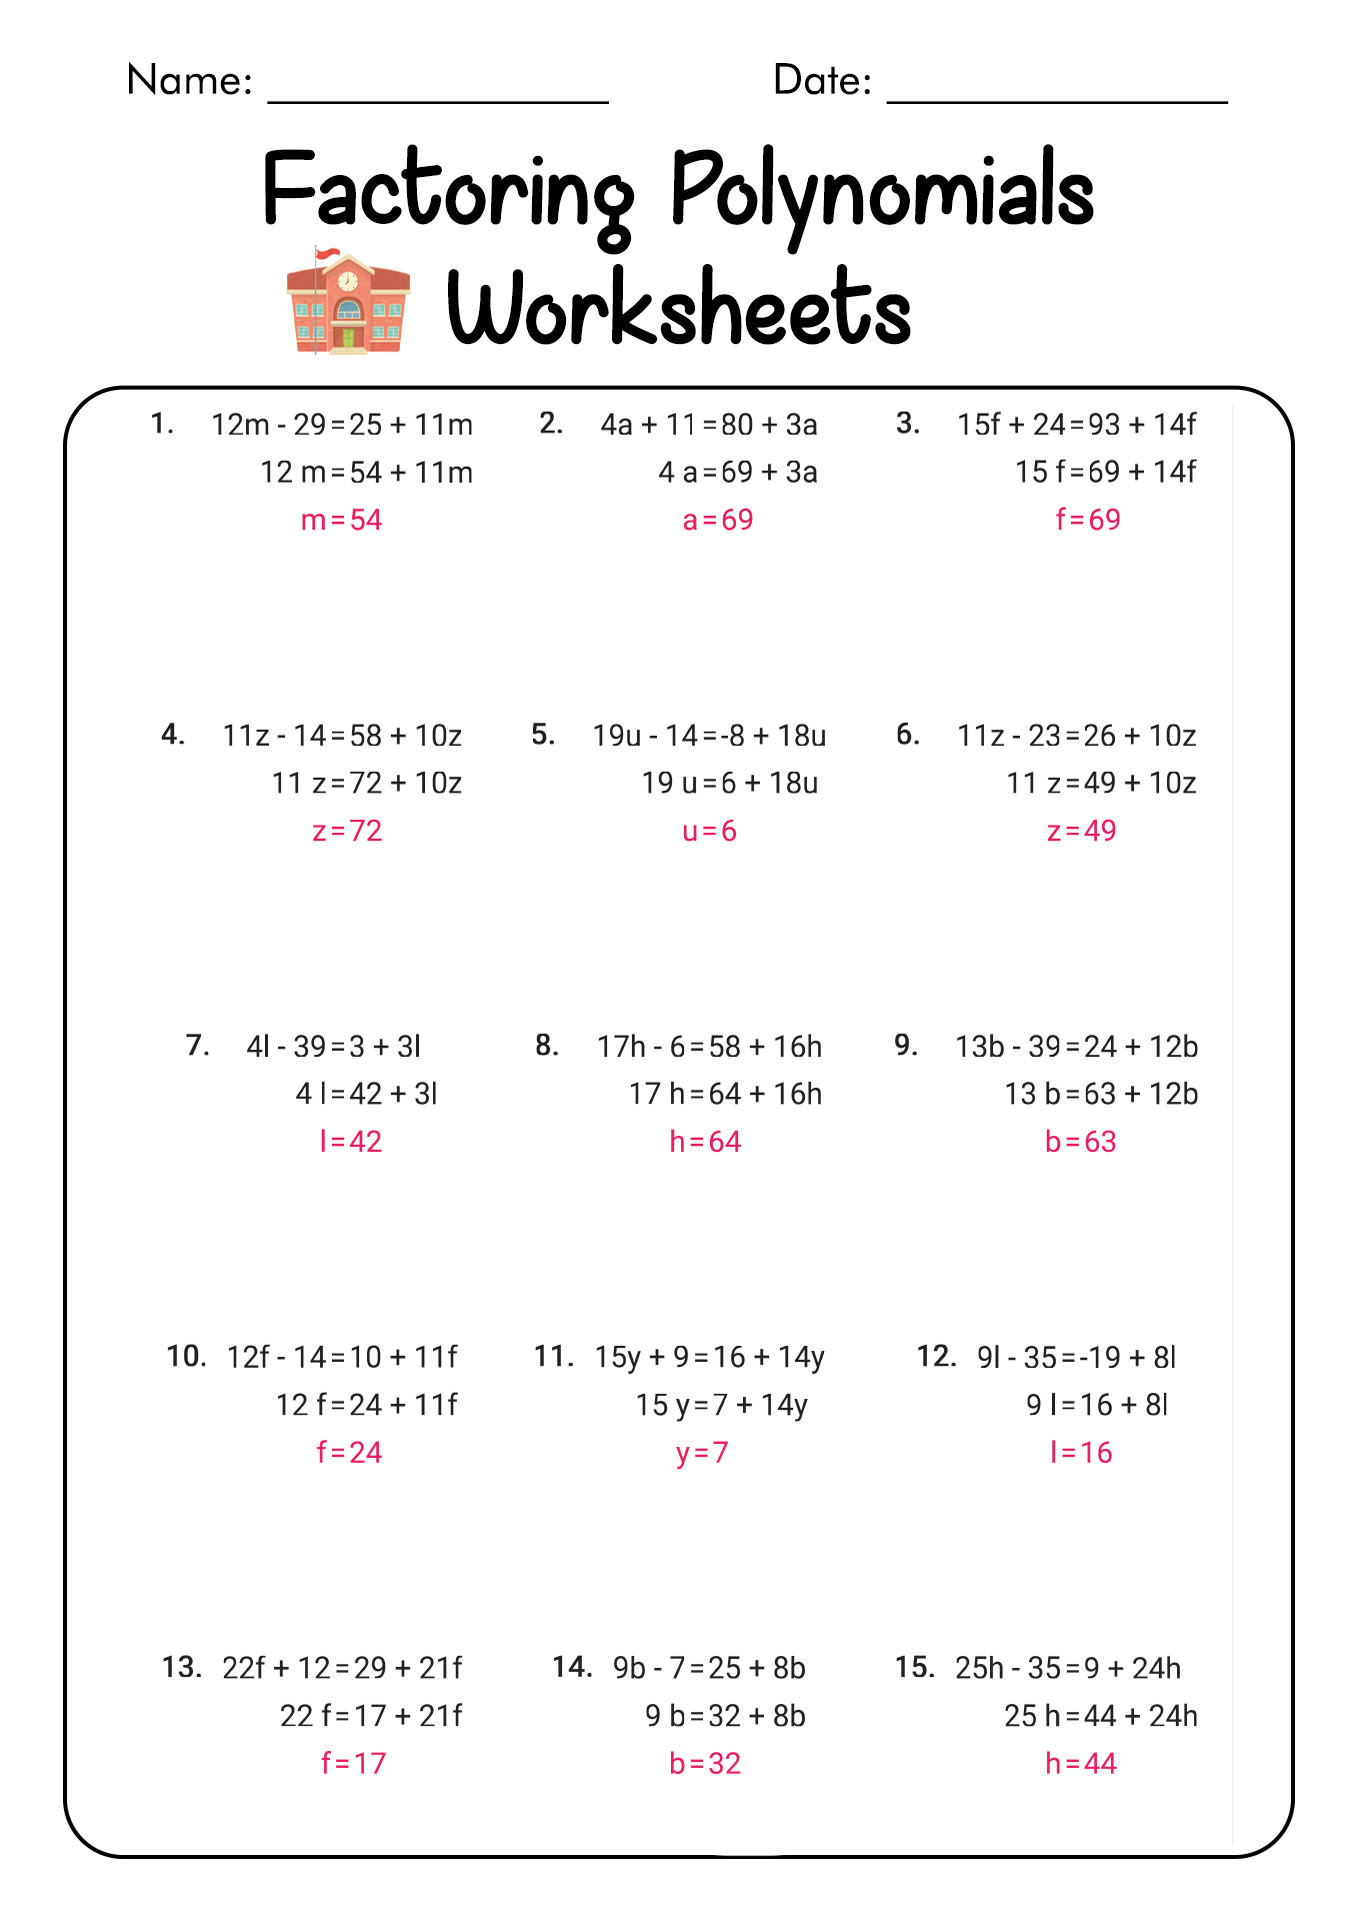 Factoring Trinomials Practice Worksheet - Promotiontablecovers Pertaining To Factoring Trinomials Practice Worksheet